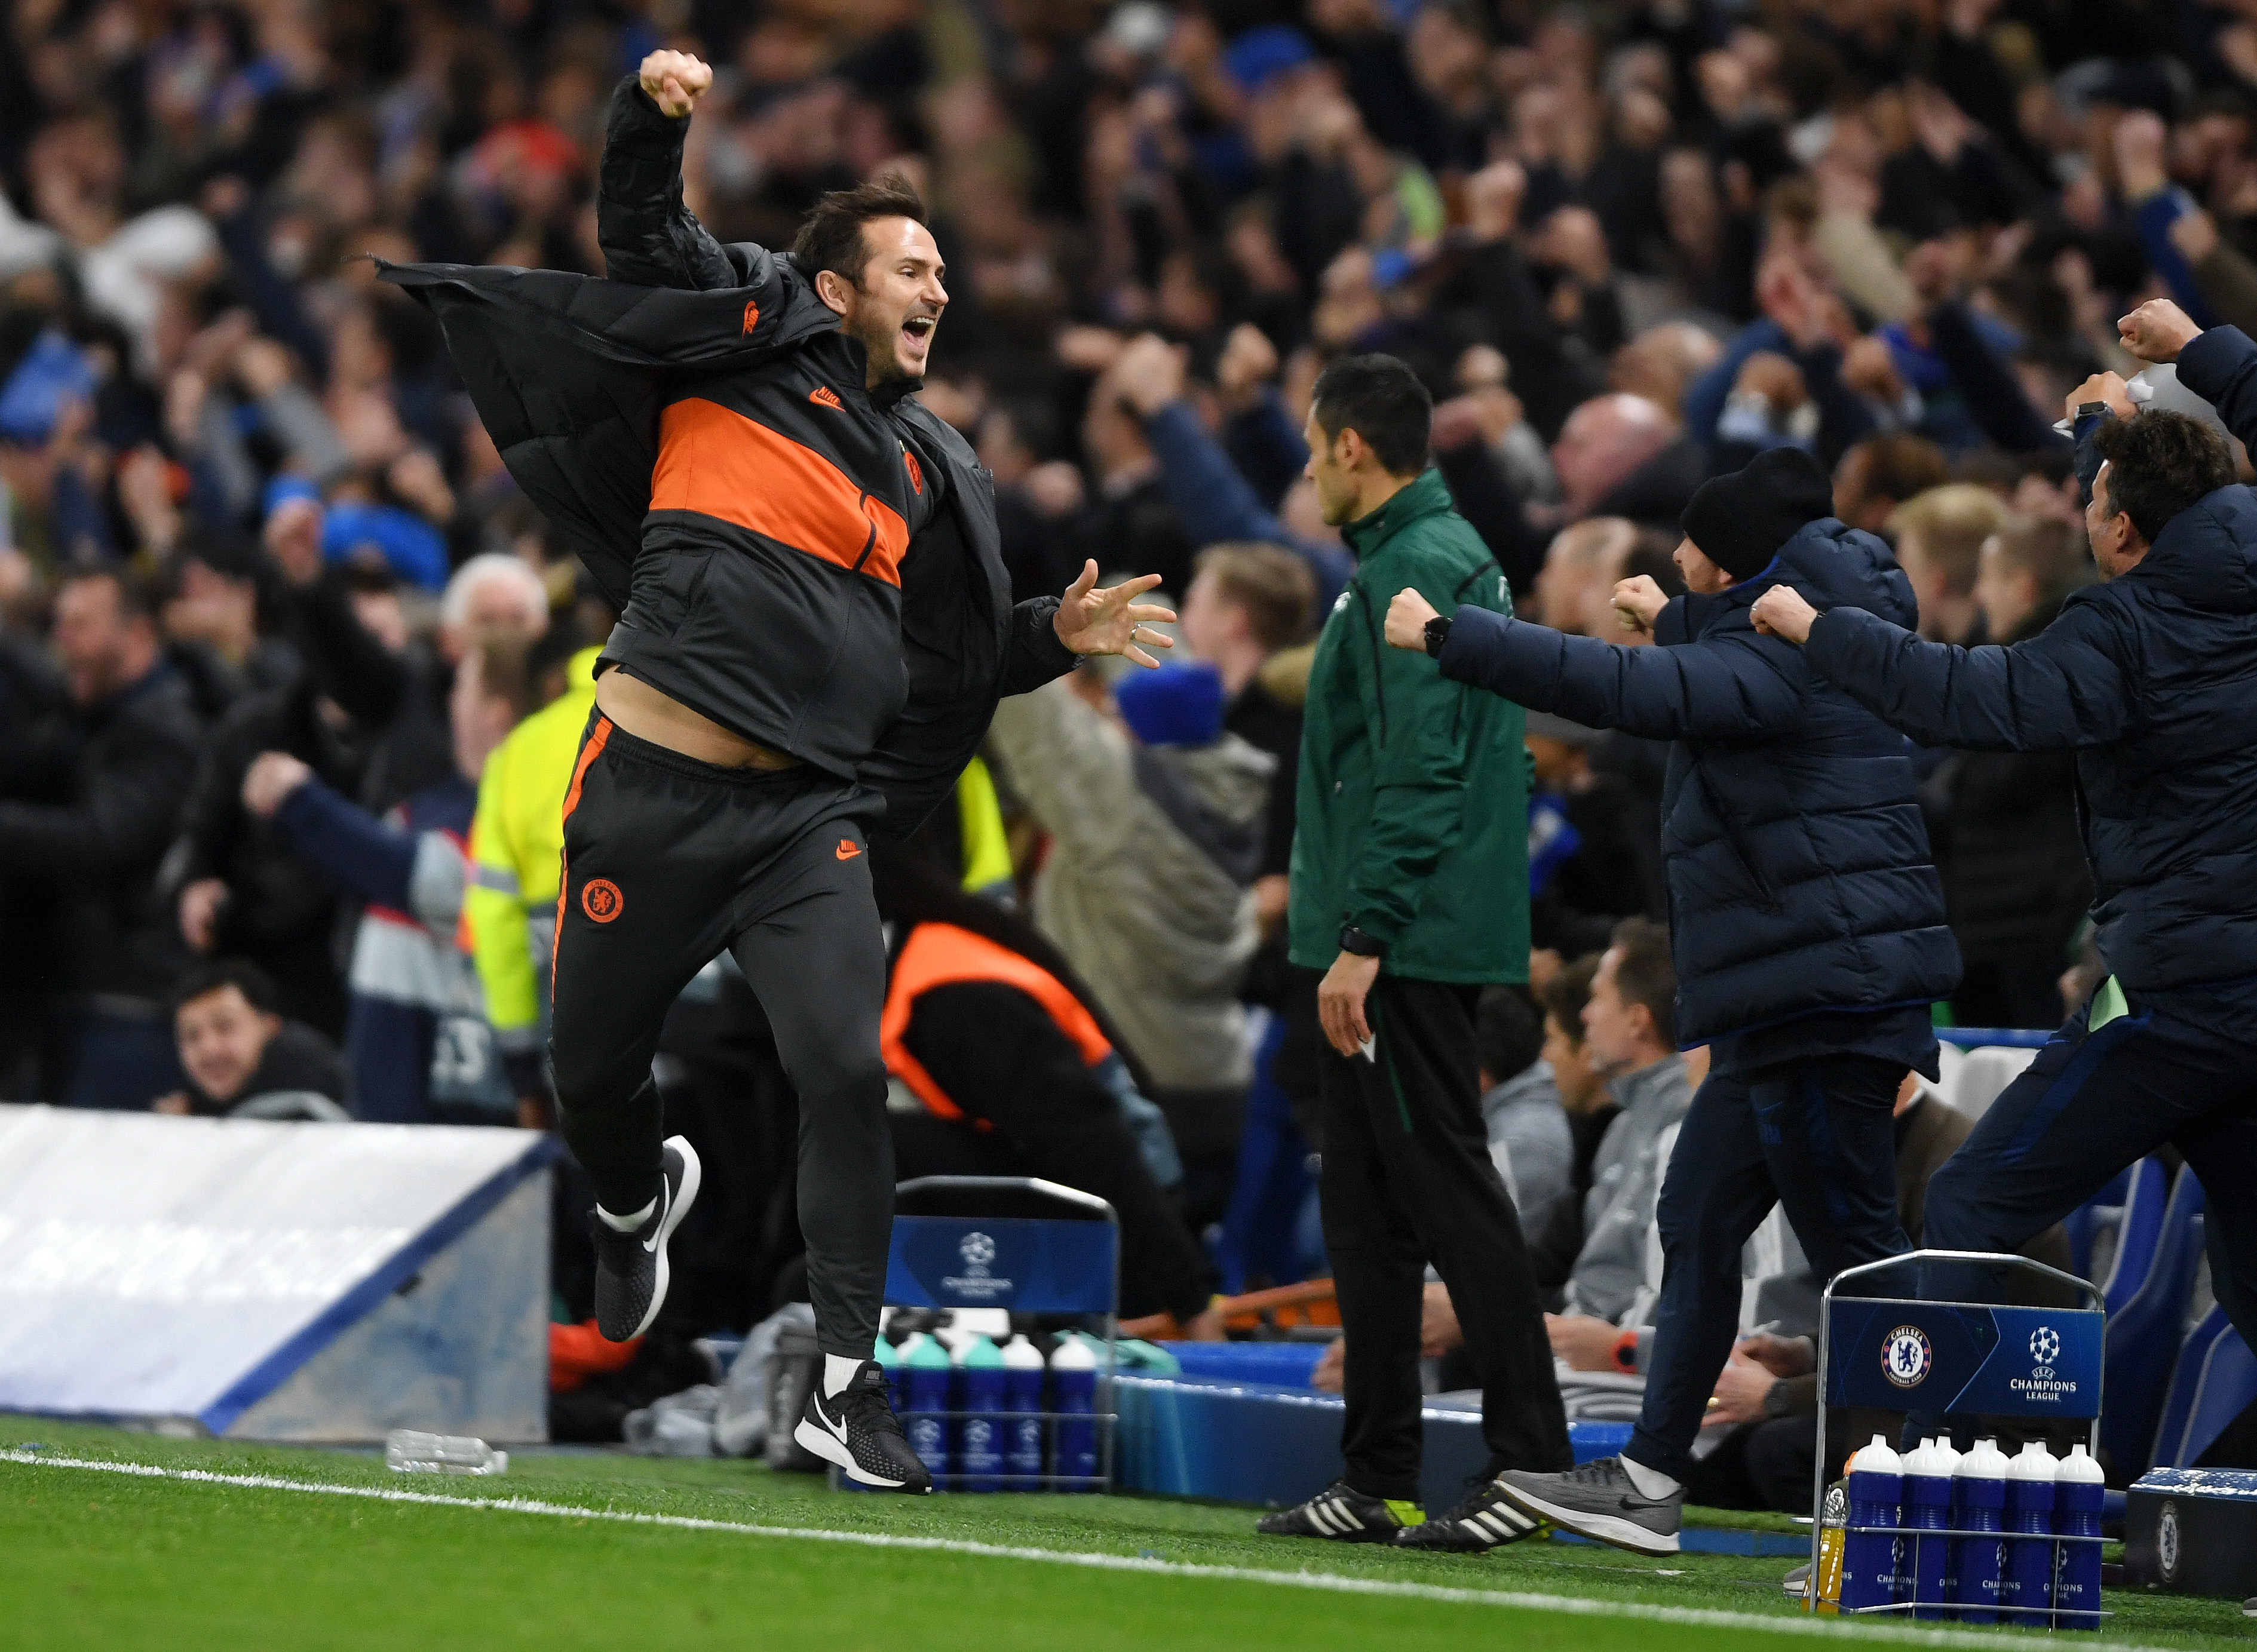 LONDON, ENGLAND - NOVEMBER 05: Frank Lampard, Manager of Chelsea celebrates during the UEFA Champions League group H match between Chelsea FC and AFC Ajax at Stamford Bridge on November 05, 2019 in London, United Kingdom. (Photo by Mike Hewitt/Getty Images)